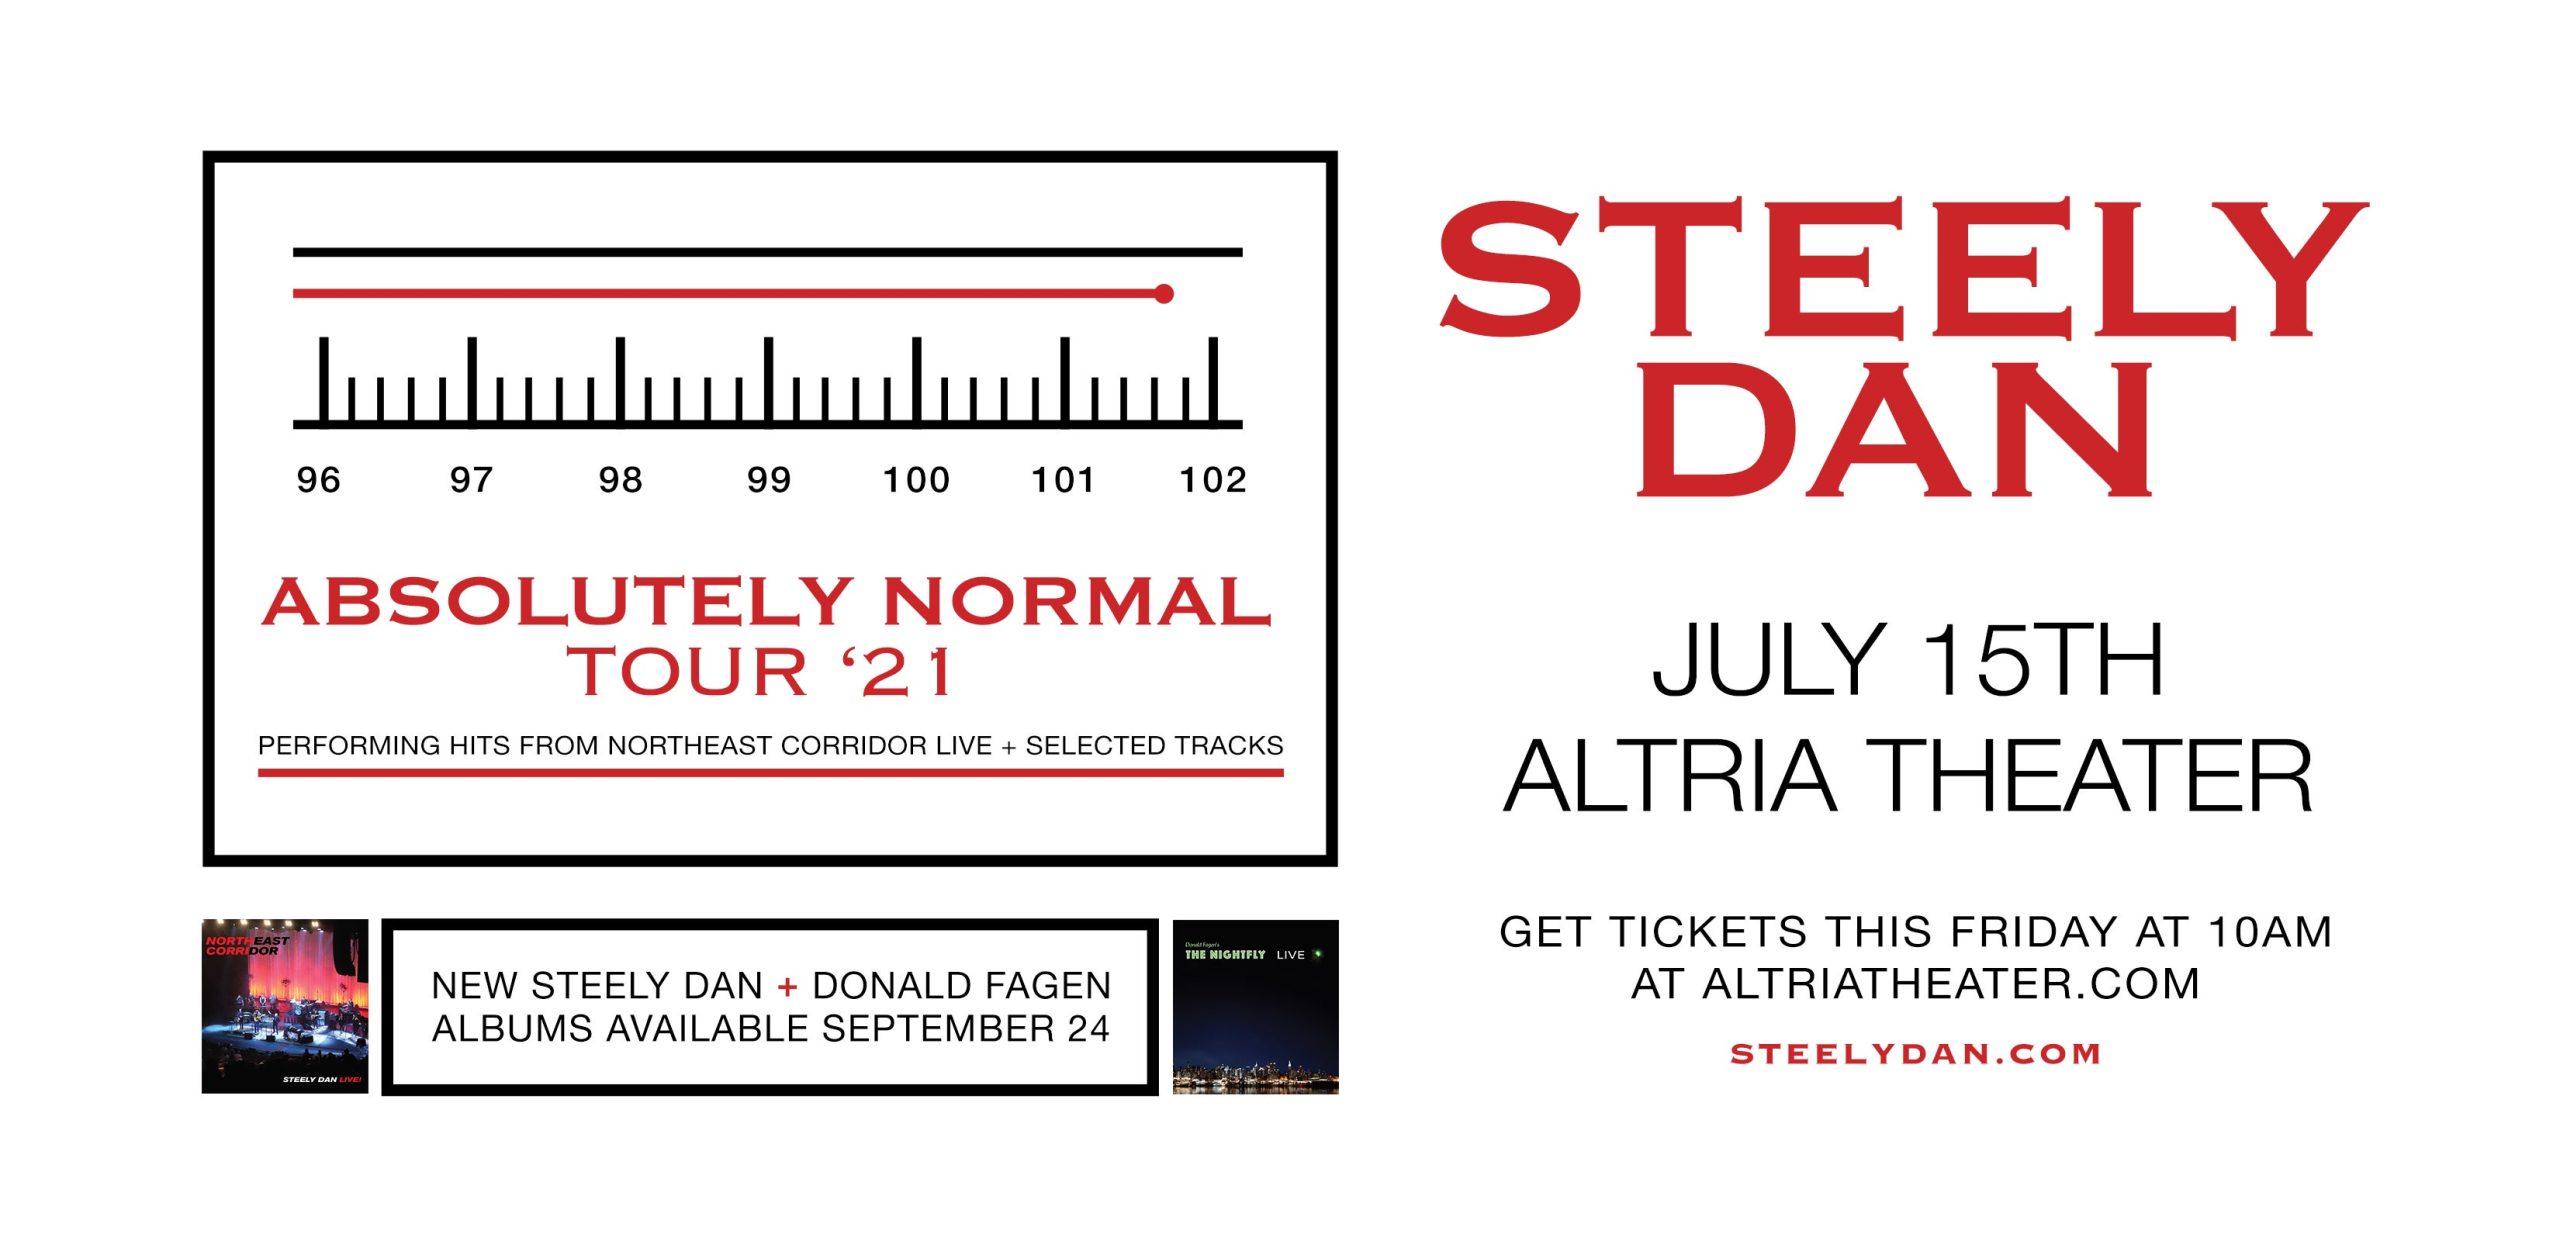 Steely Dan- The Absolutely Normal Tour: Friday, July 15- 8:00 PM